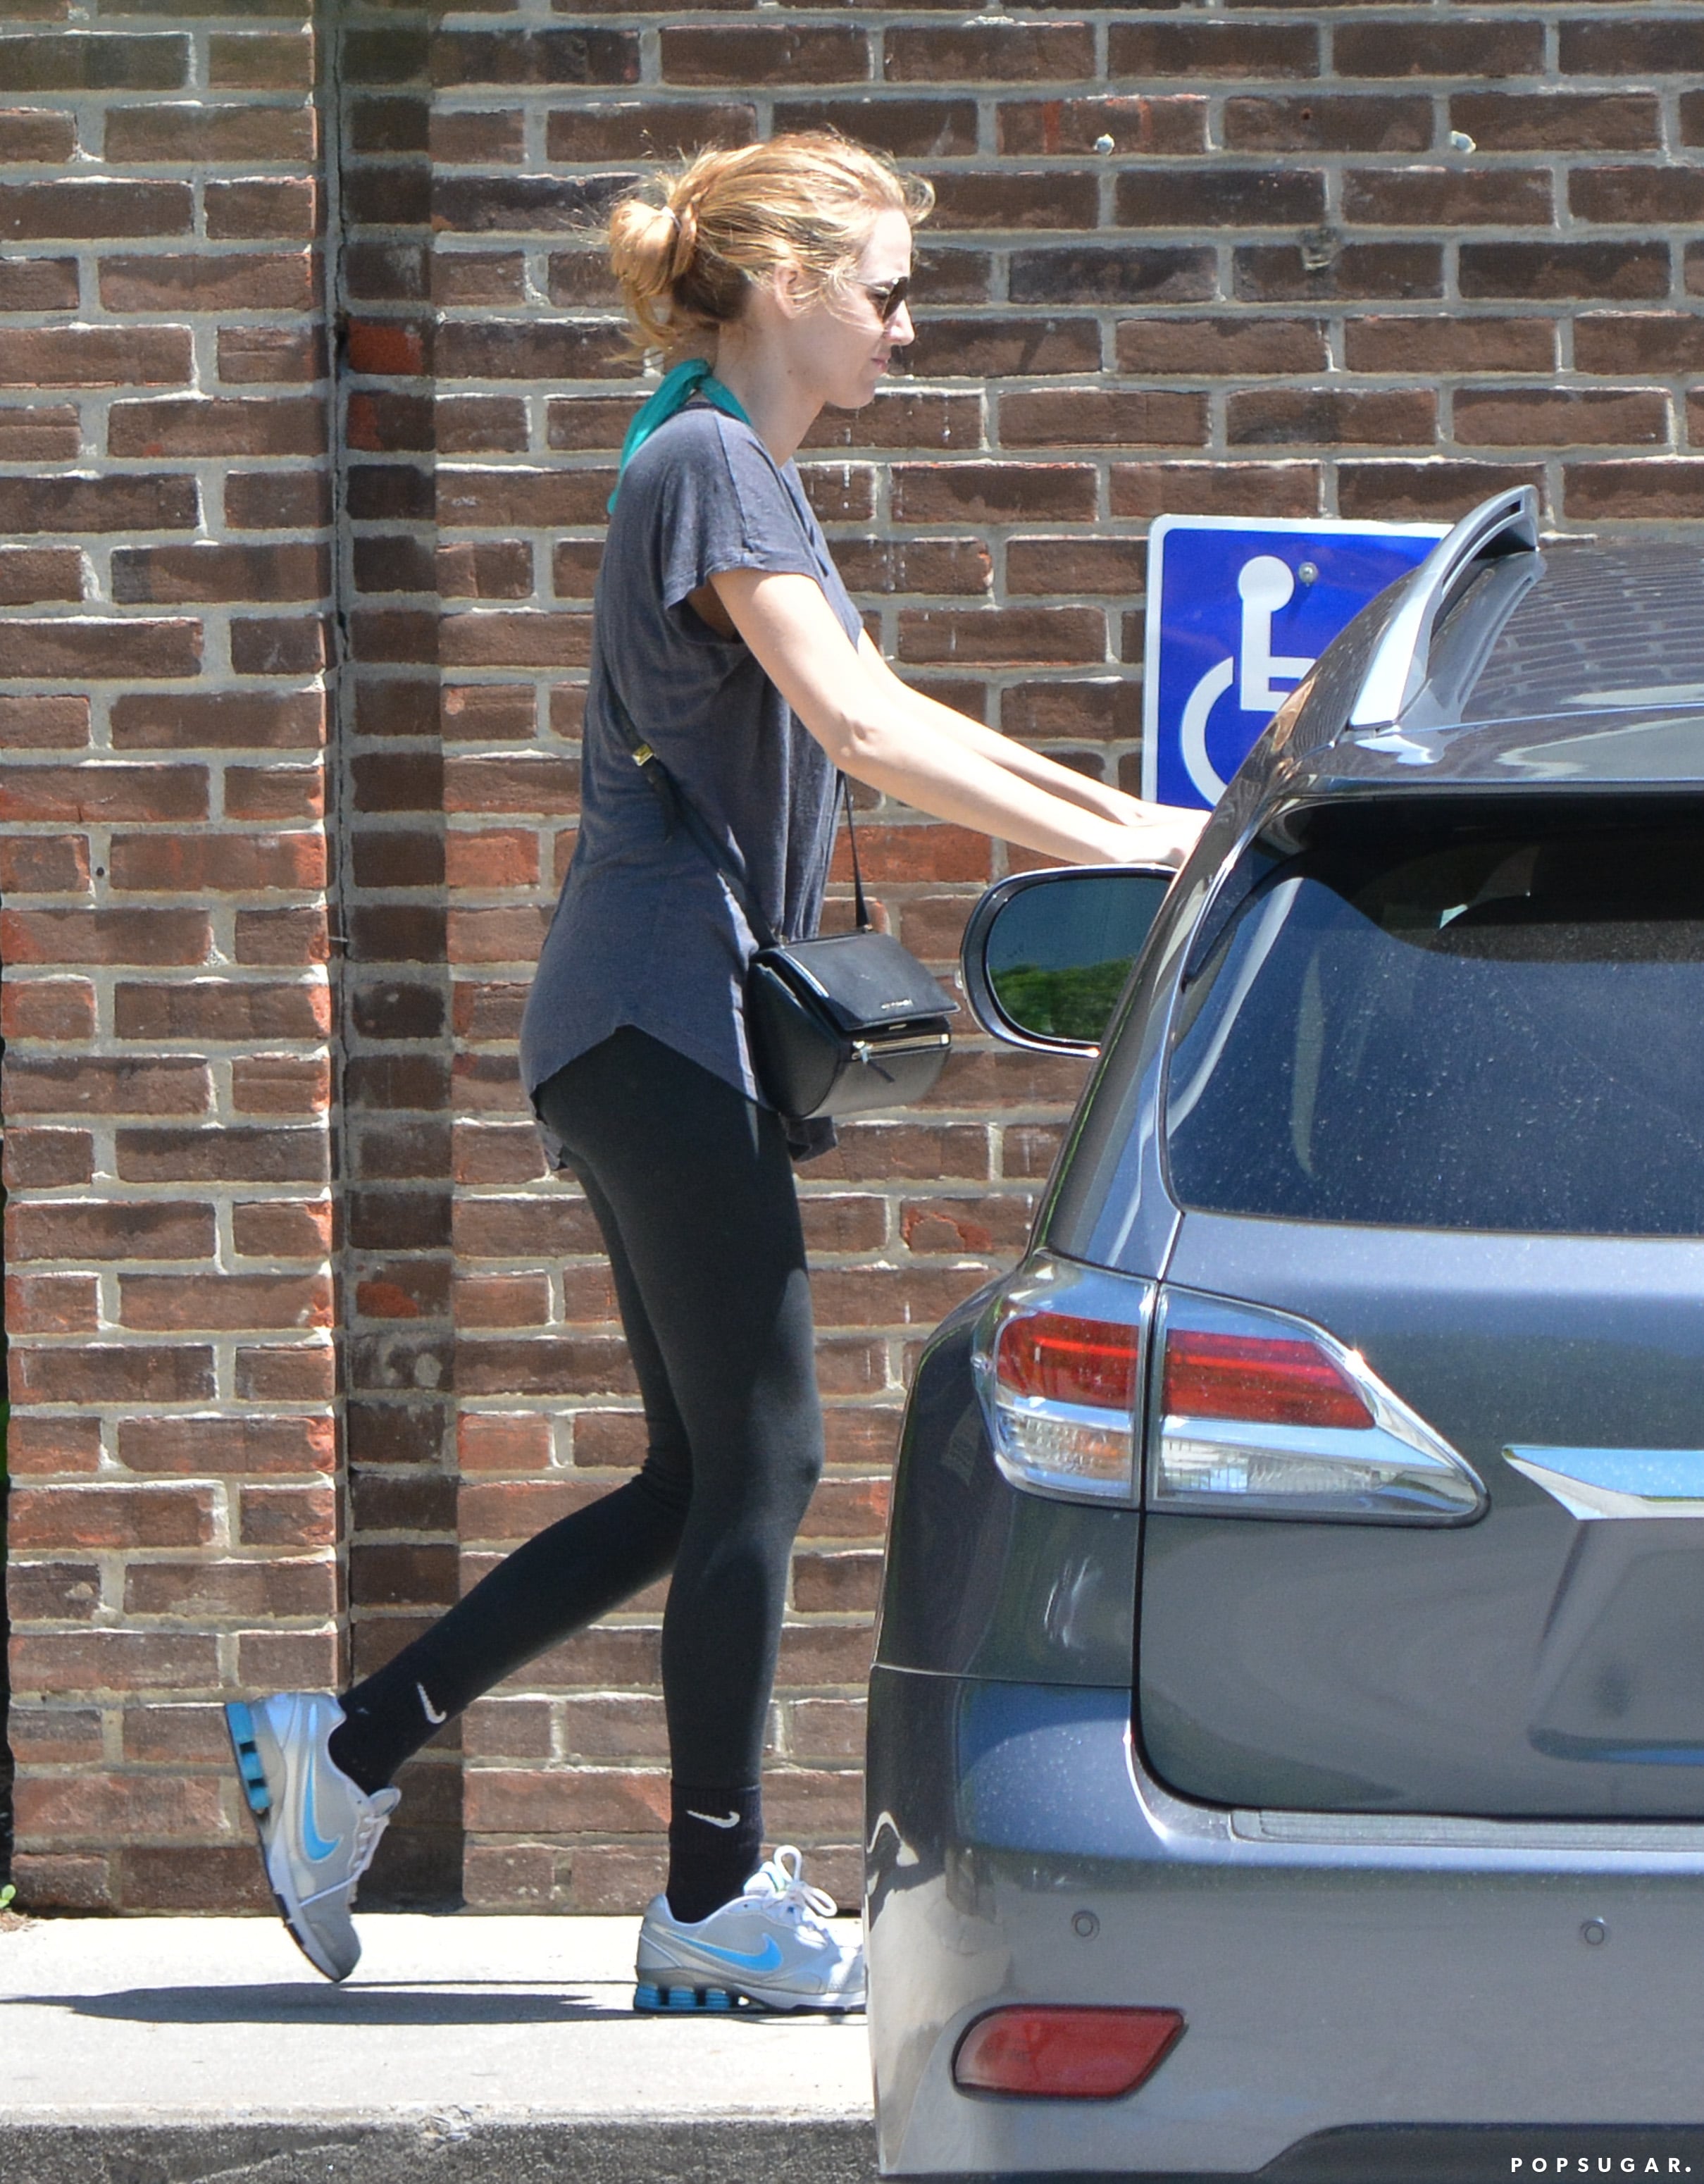 Blake Lively in Yoga Pants, Pictures